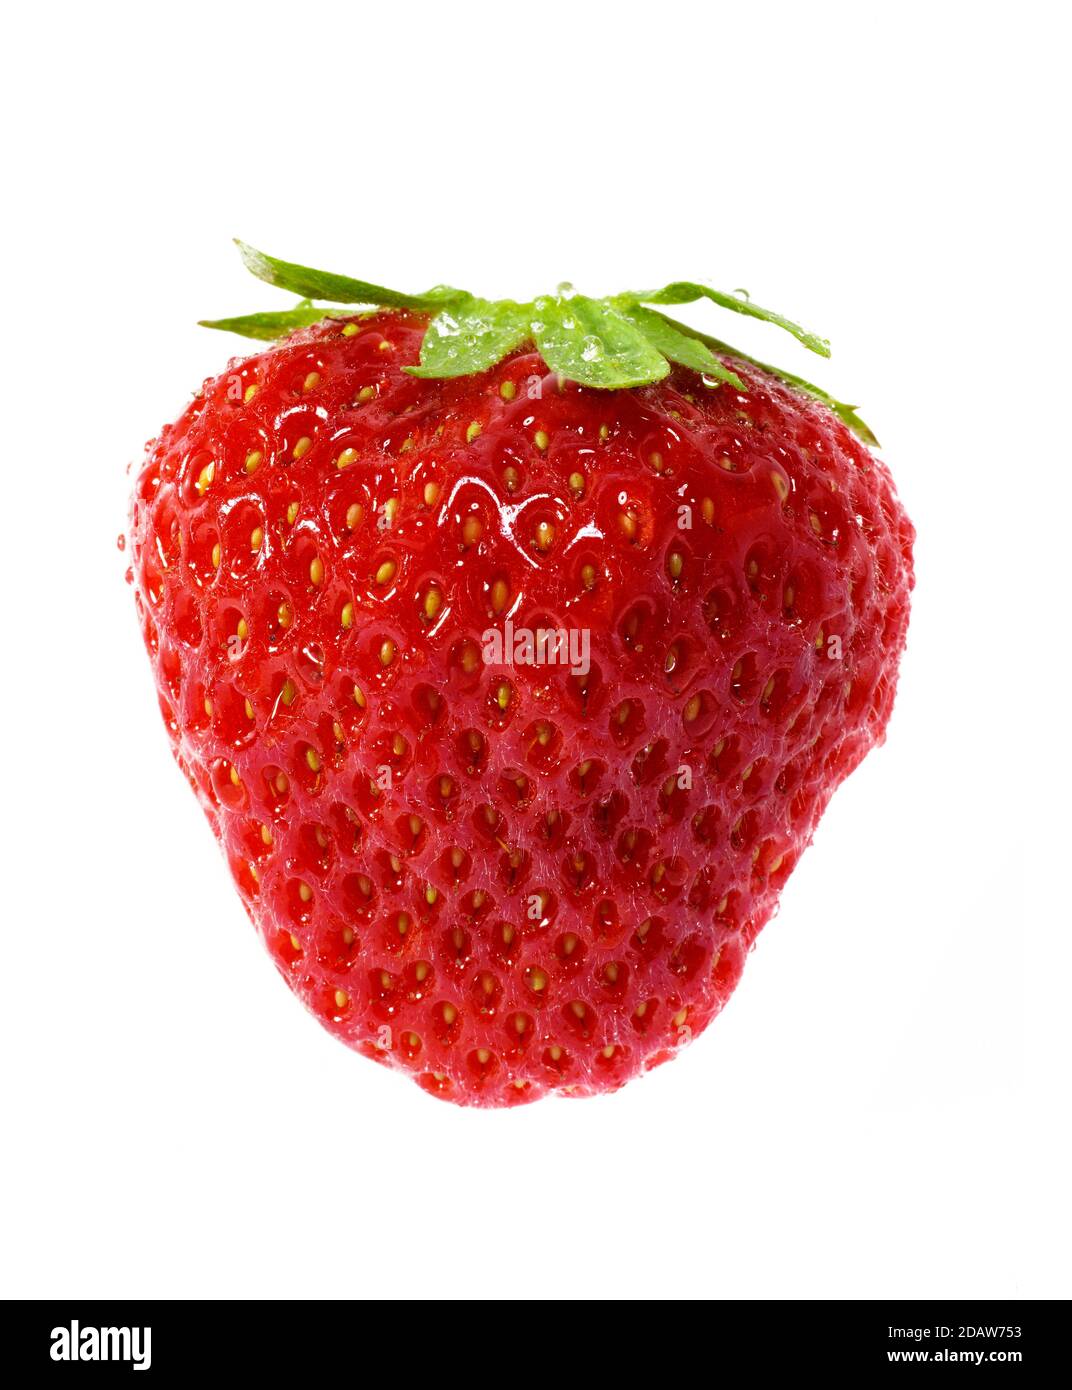 A big strawberry with green leaf, on a white background. Stock Photo